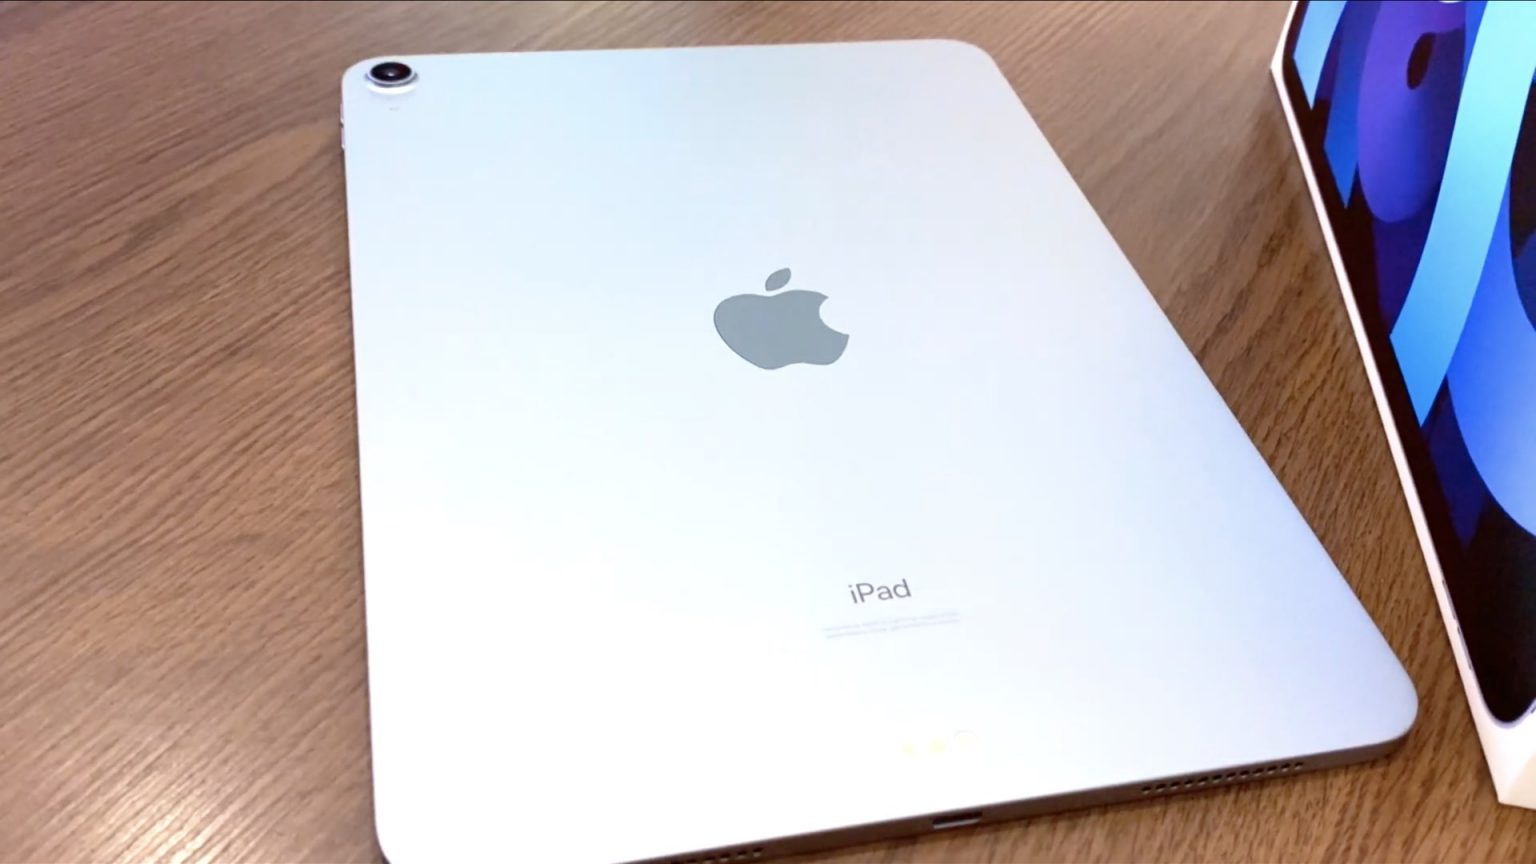 Here's your very first unboxing video of Apple's new iPad Air 4 in Sky Blue